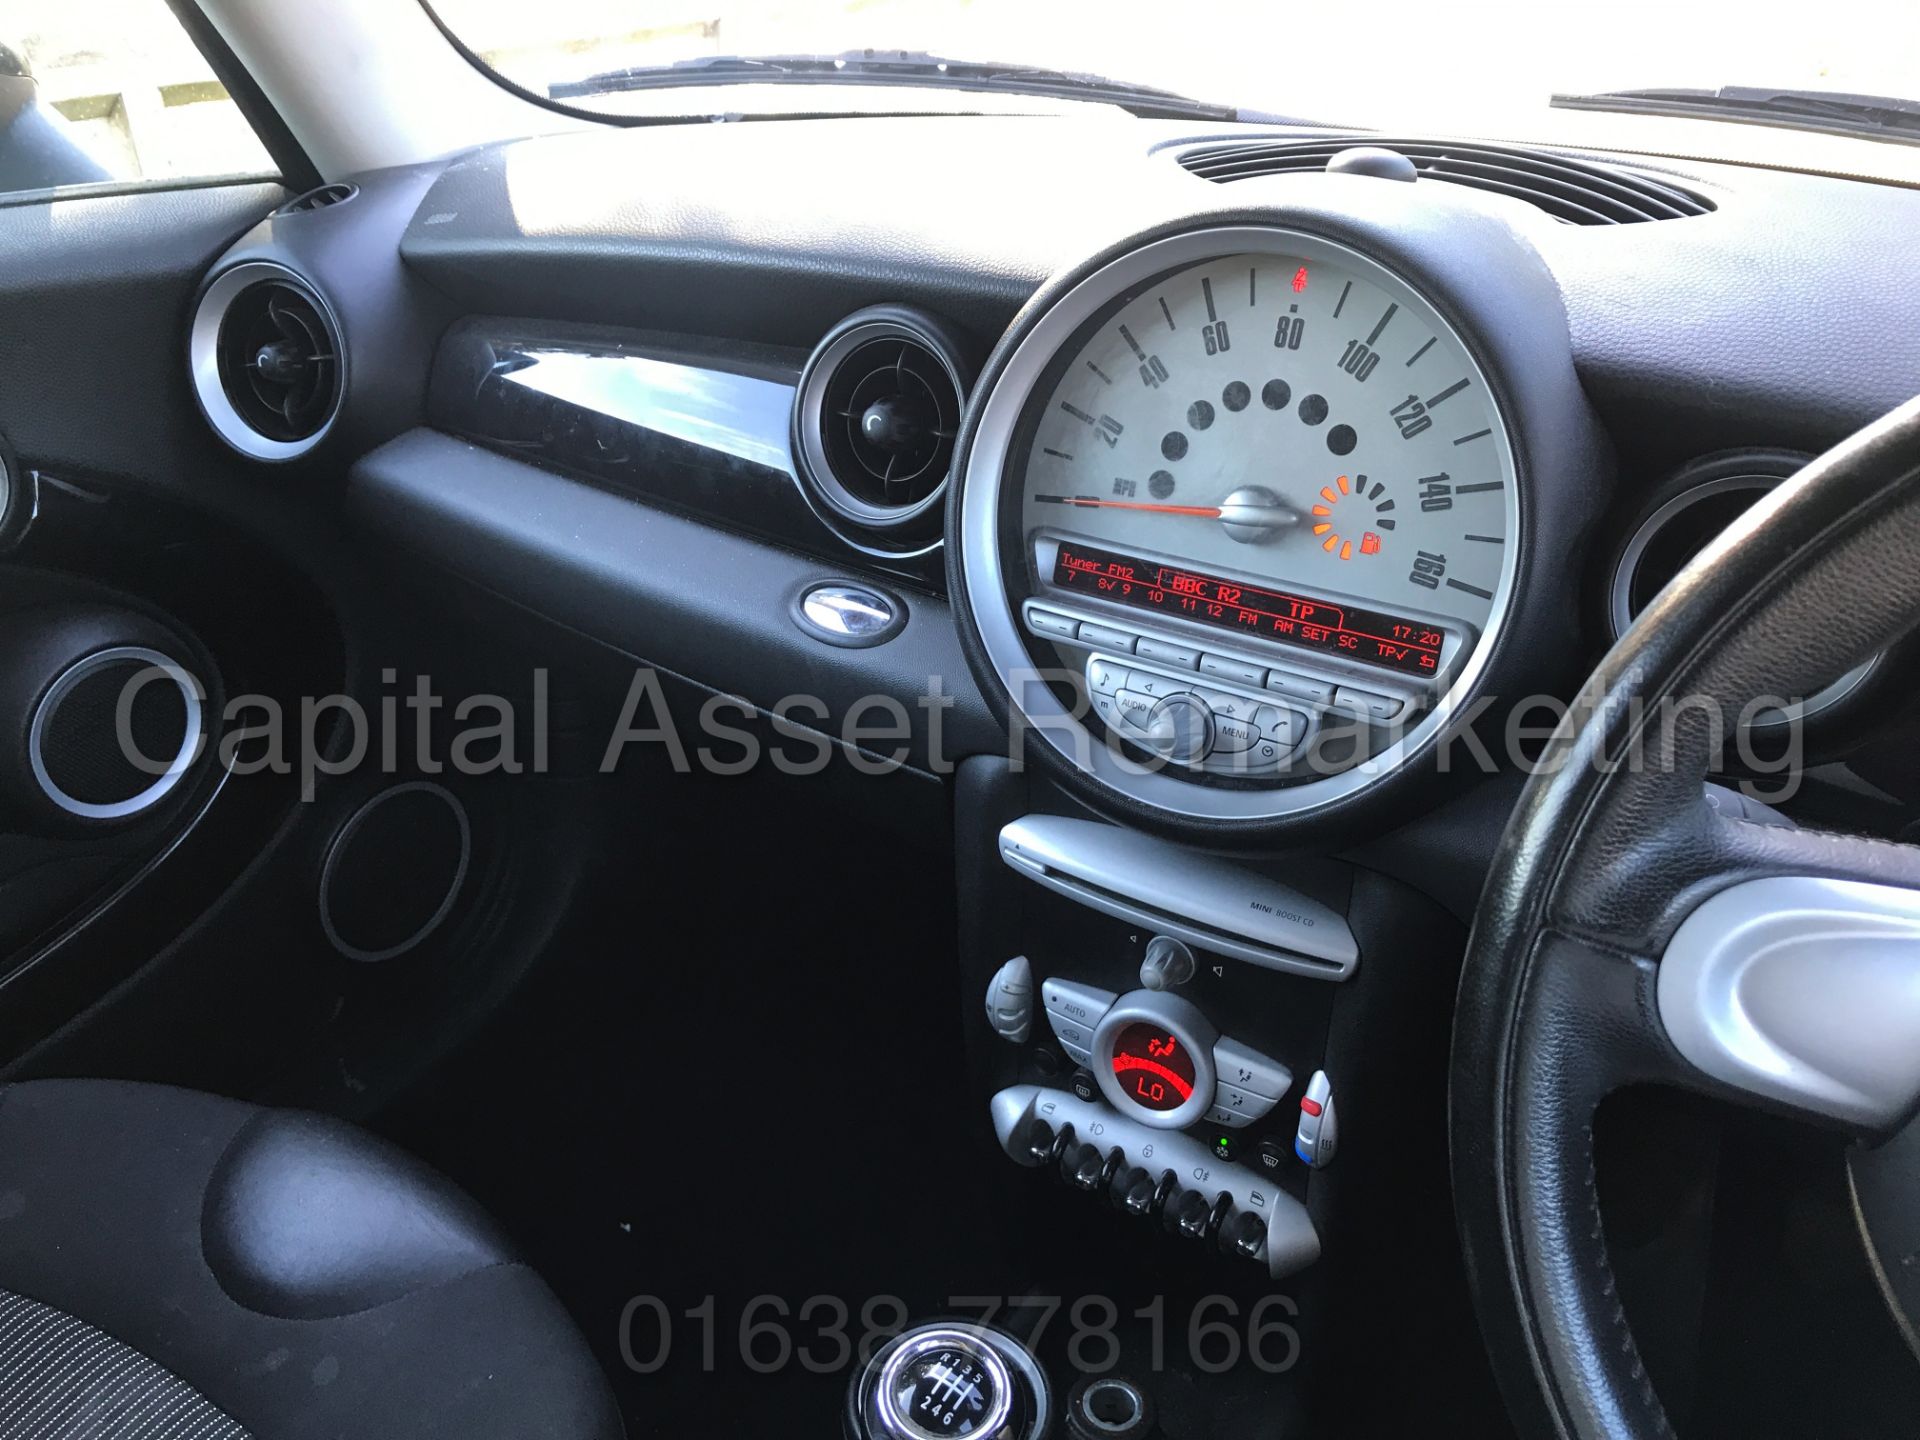 MINI COOPER D 'GRAPHITE EDITION' (2010) '1.6 DIESEL - 6 SPEED - LEATHER - STOP / START' (NO VAT) - Image 22 of 28